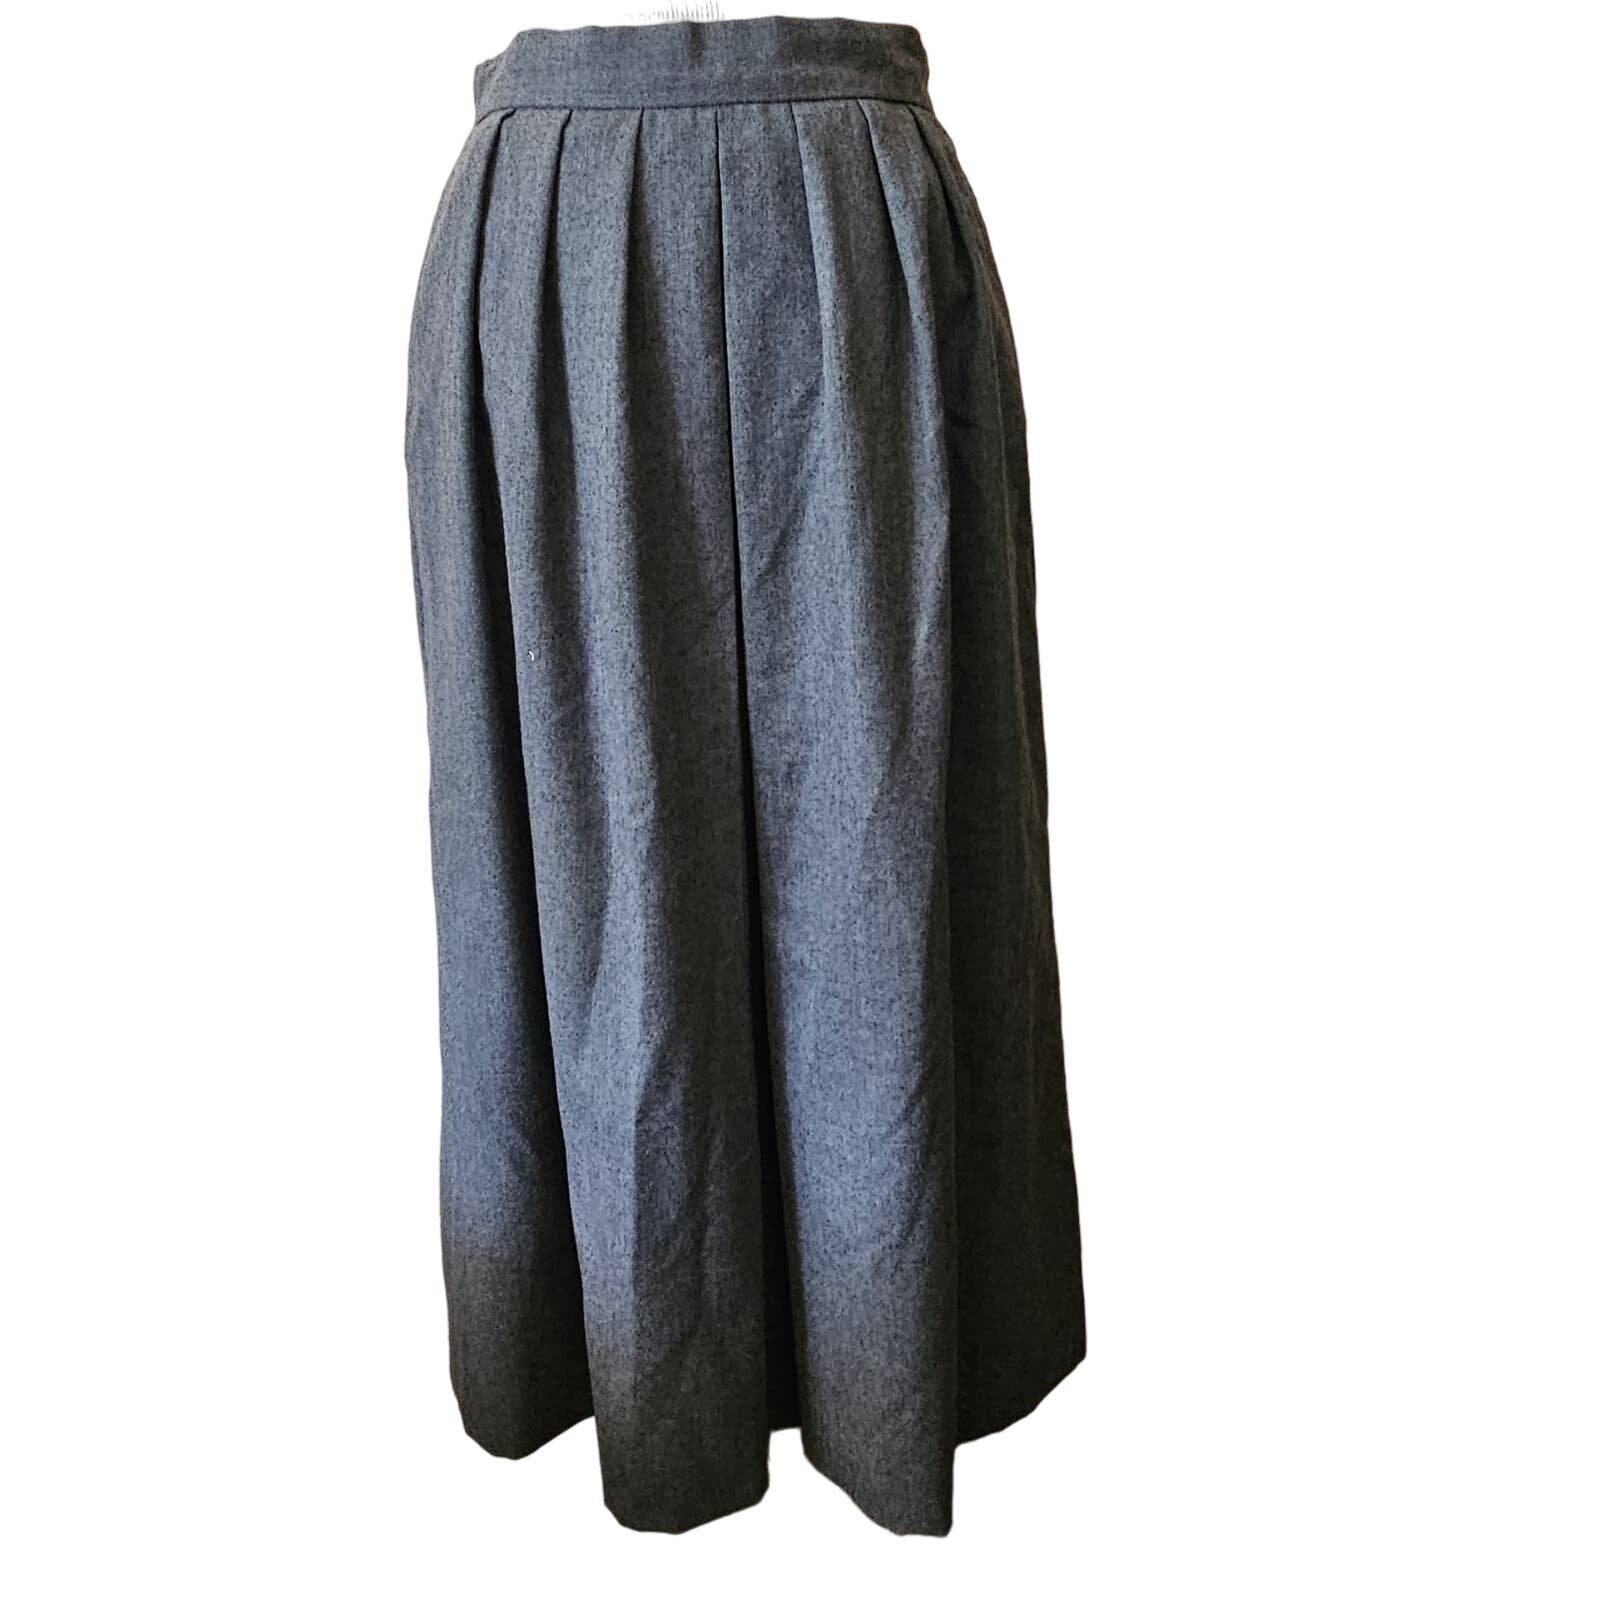 good price Vintage Grey Wool Midi Skirt With Pockets Size Small PN8iQQEXn just for you